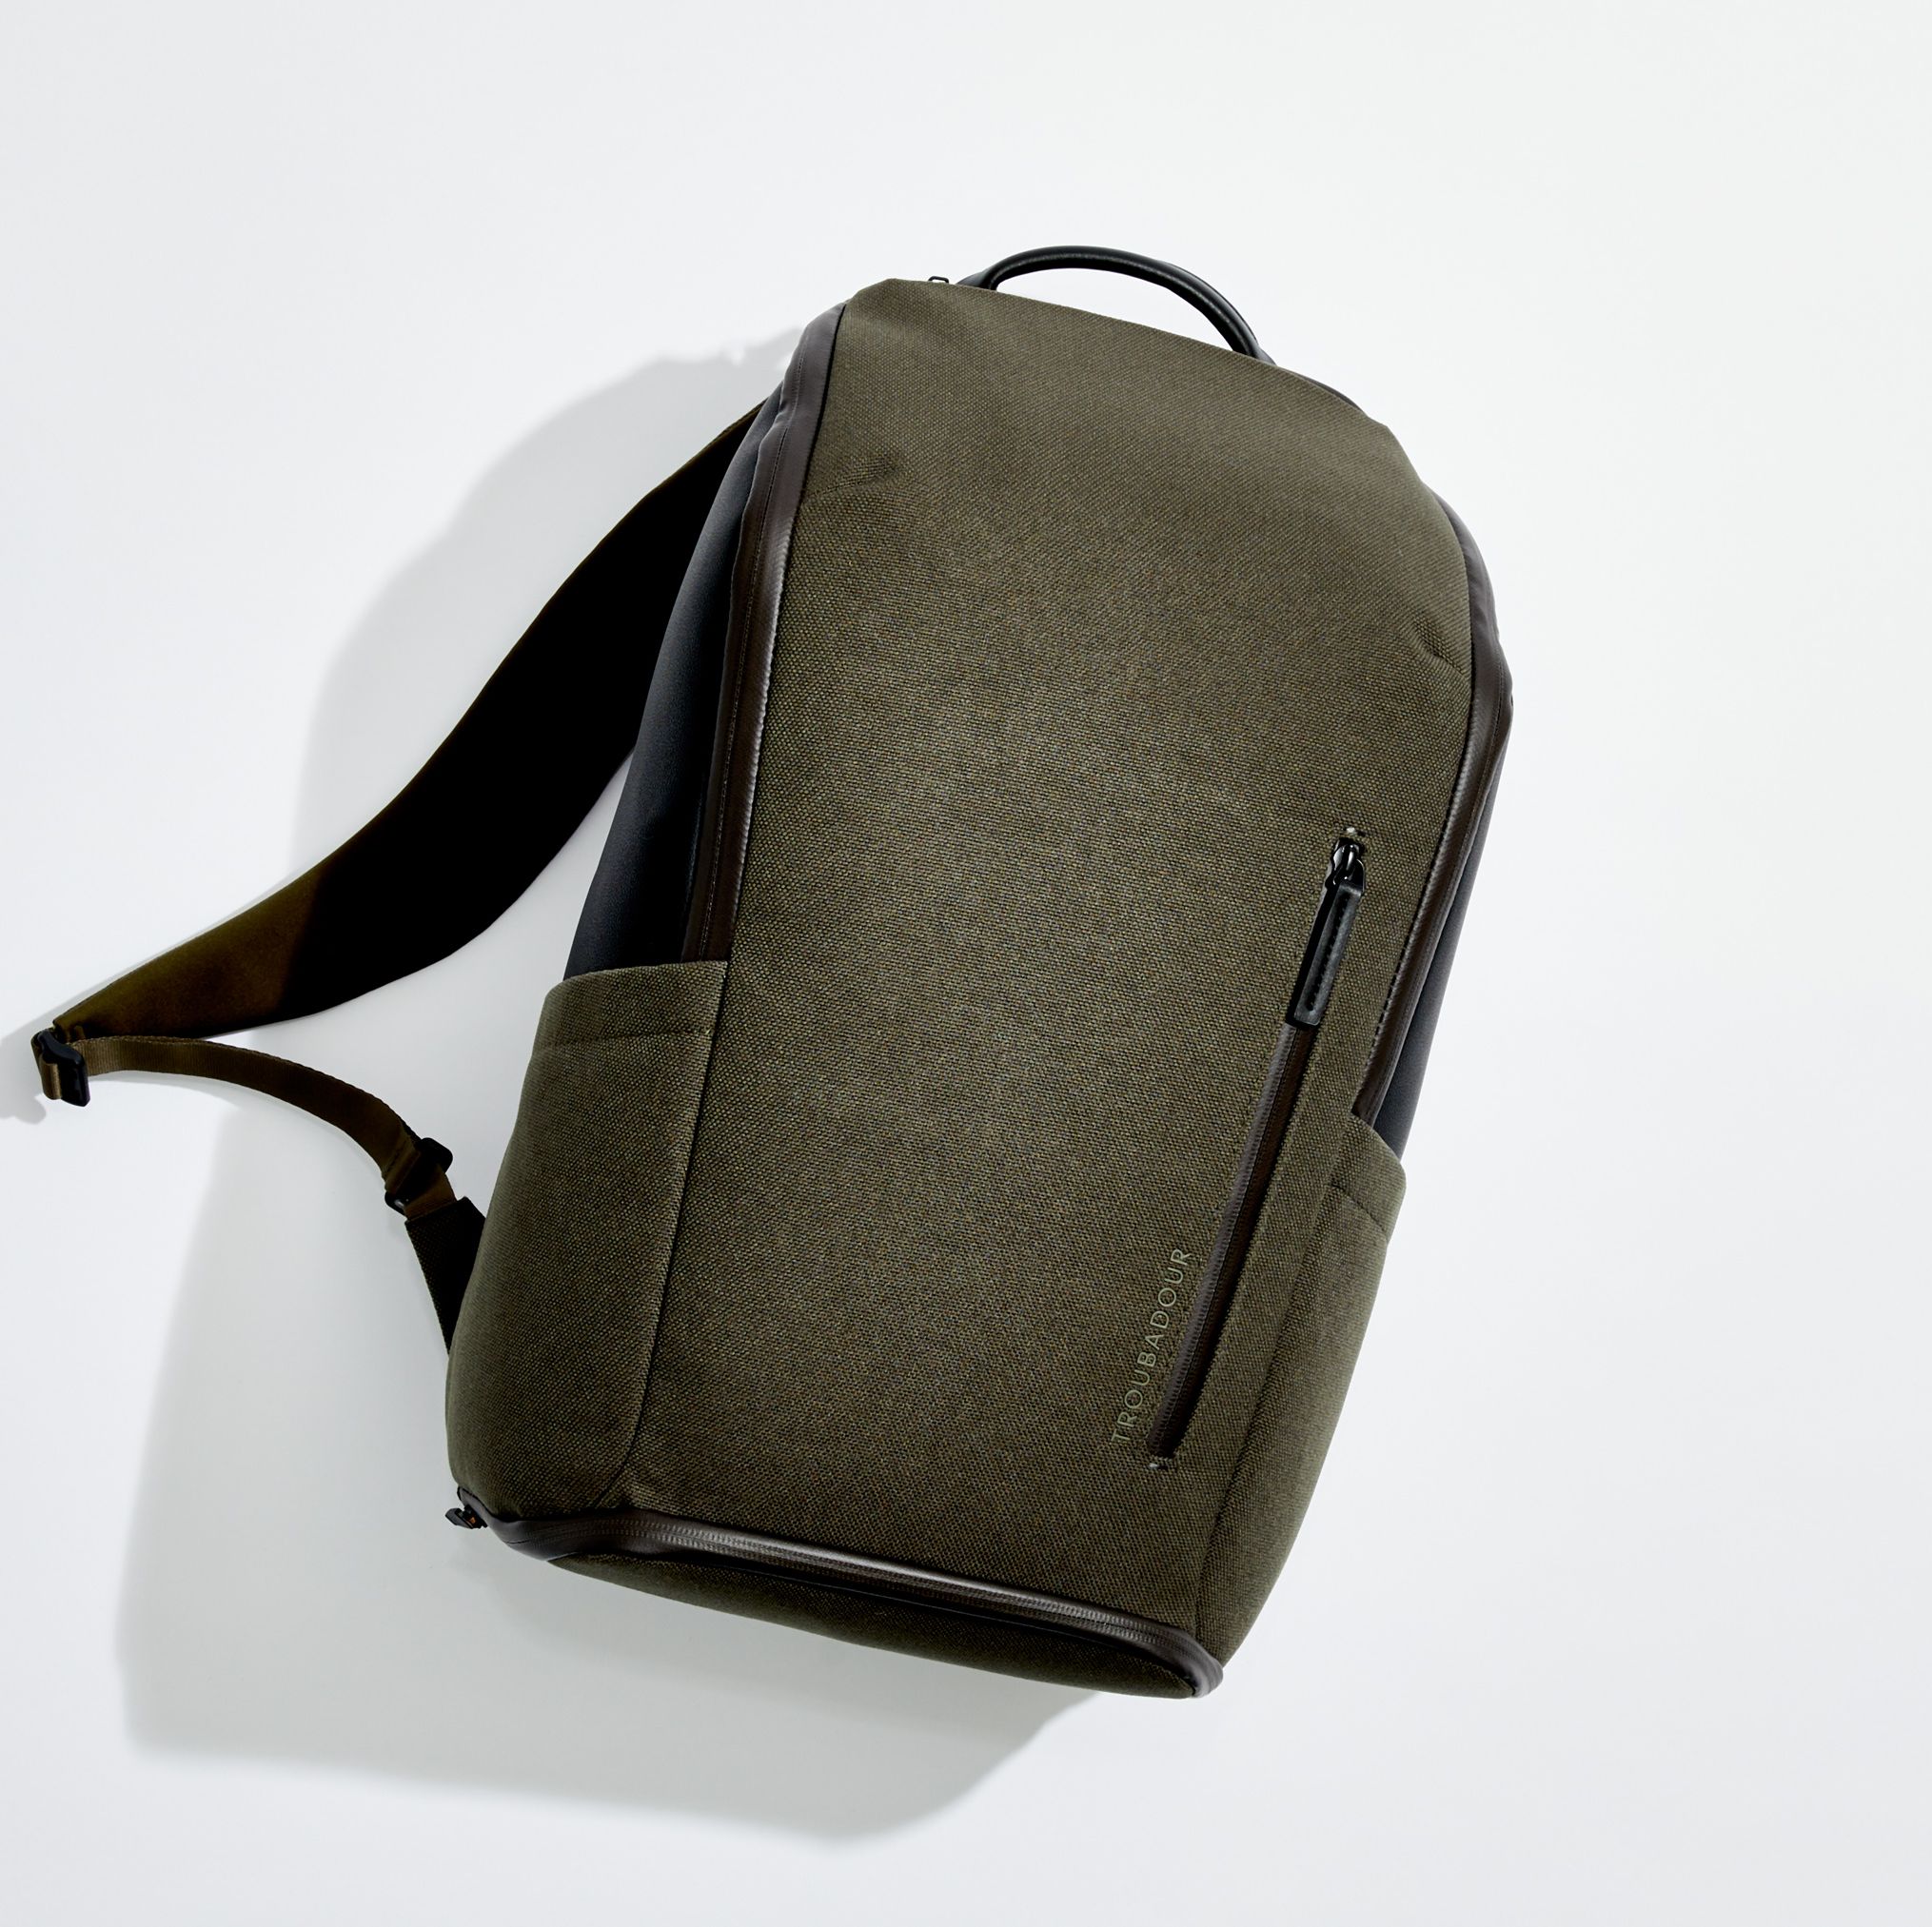 Troubadour's Pioneer Backpack Is Ready for Absolutely Anything